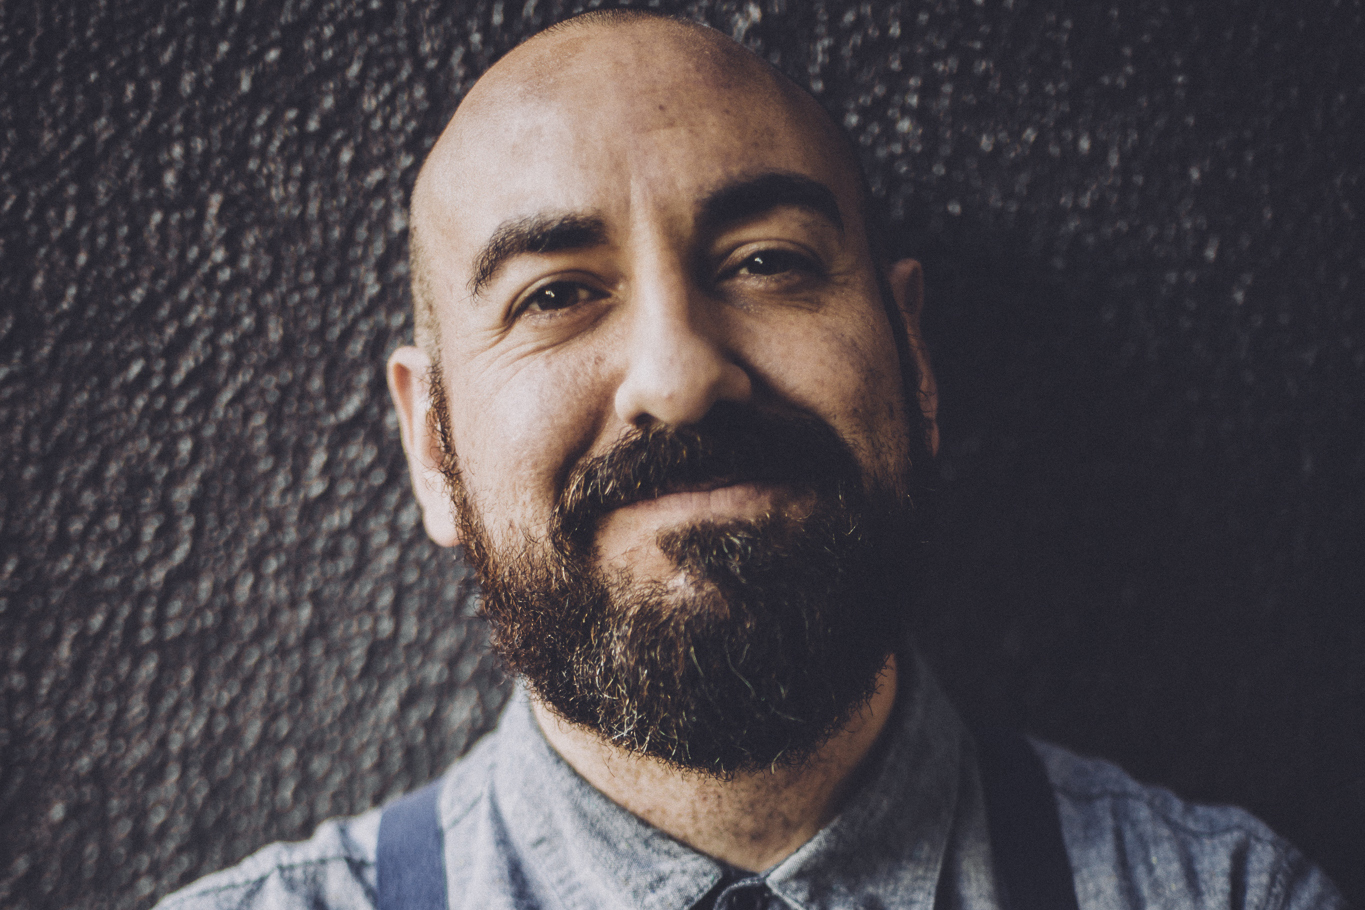 a bald, bearded white man in a blue collared shirt smiling